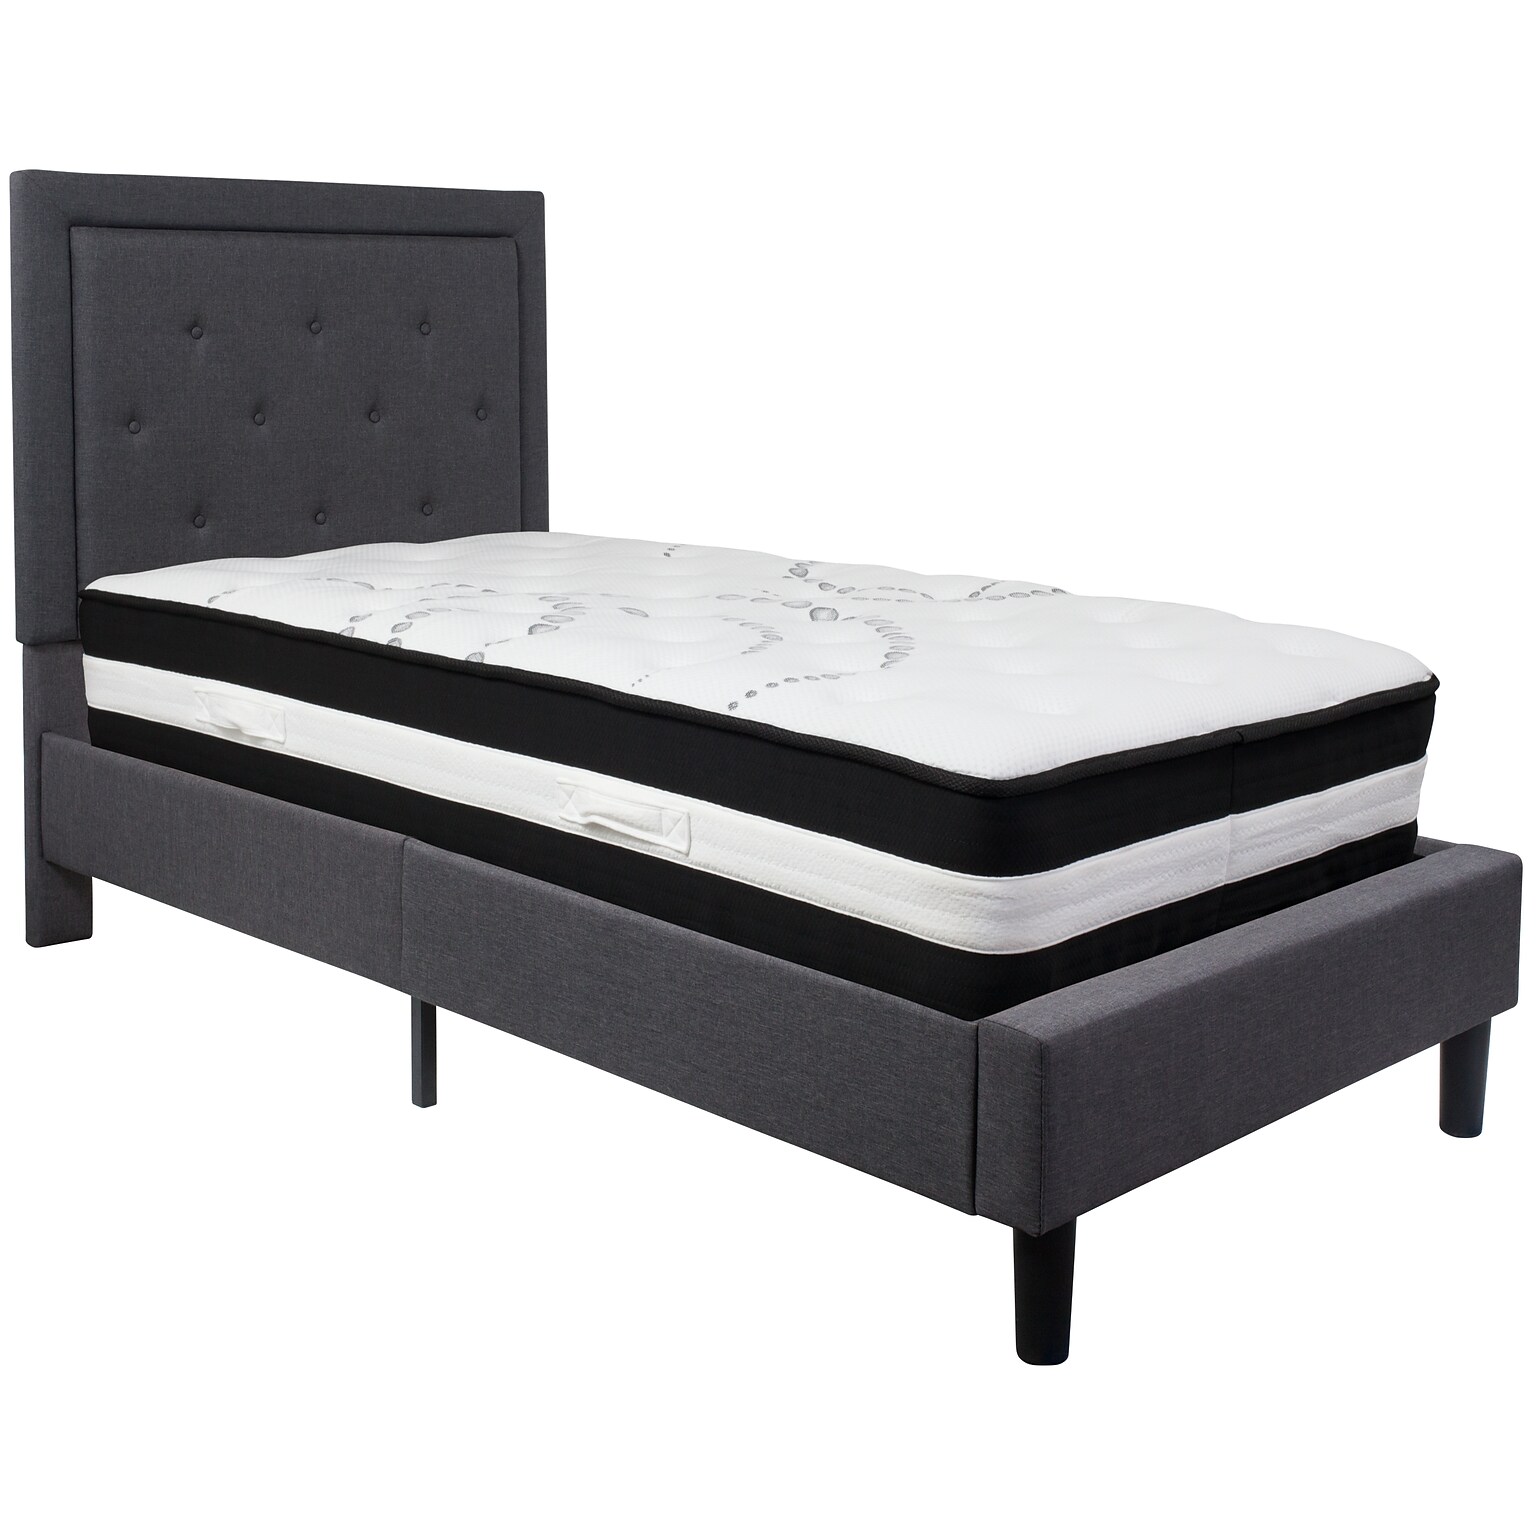 Flash Furniture Roxbury Tufted Upholstered Platform Bed in Dark Gray Fabric with Pocket Spring Mattress, Twin (SLBM29)